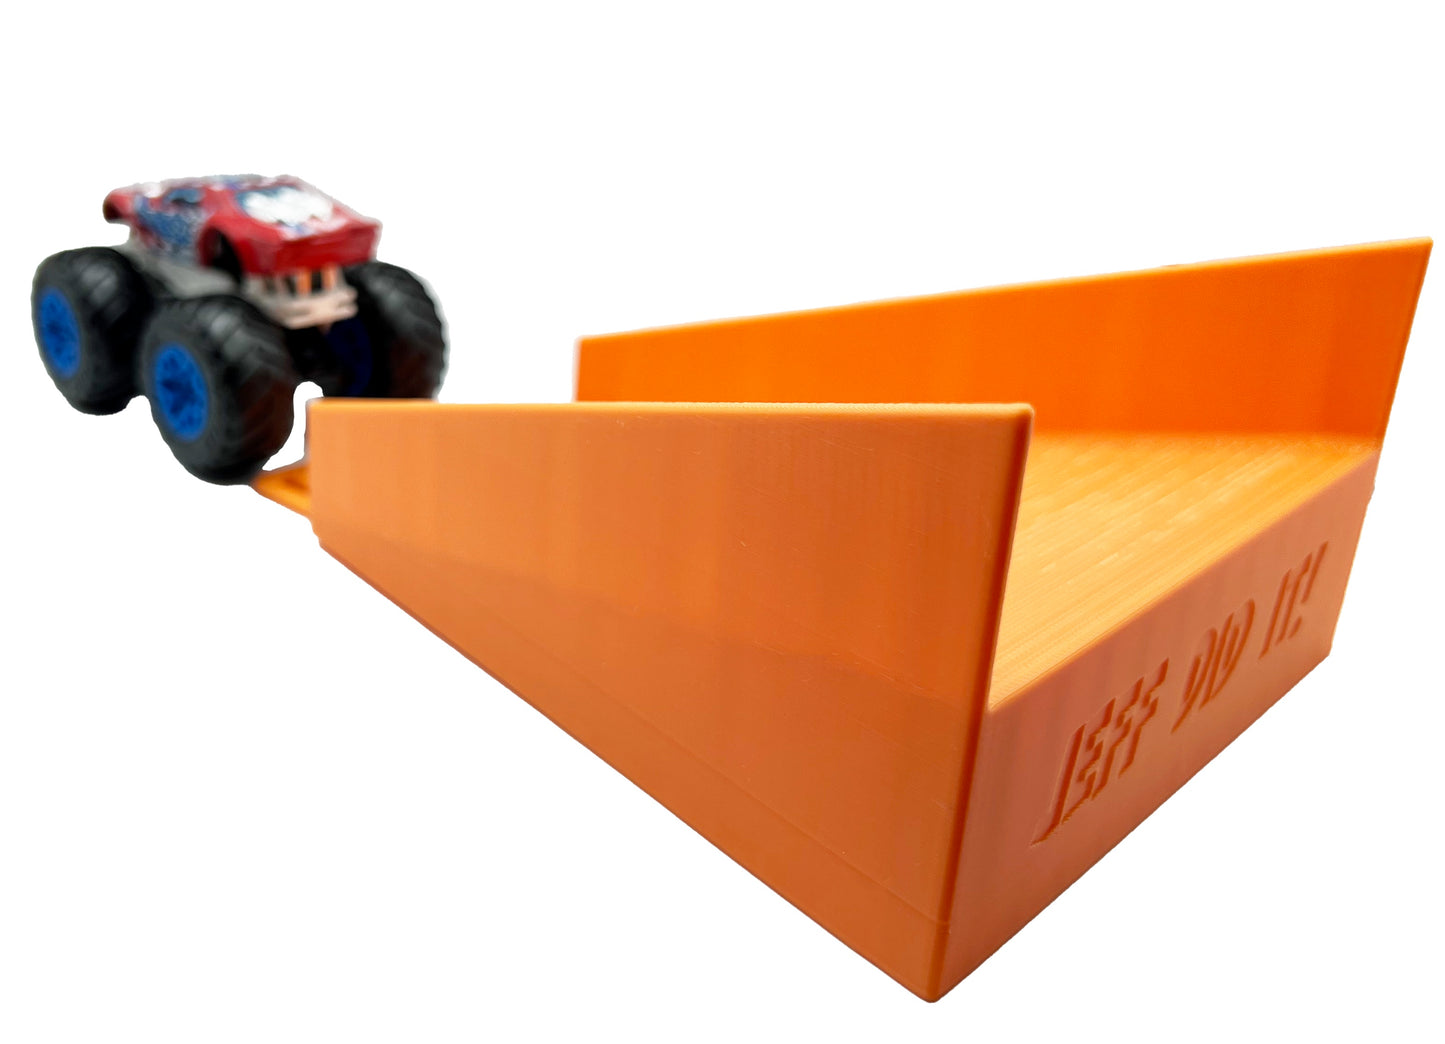 Jeff Did It! - Hot Wheels Monster Truck - 2 Lane Landing Ramp - 3D Printed - Designed and Made in the USA - Free Shipping